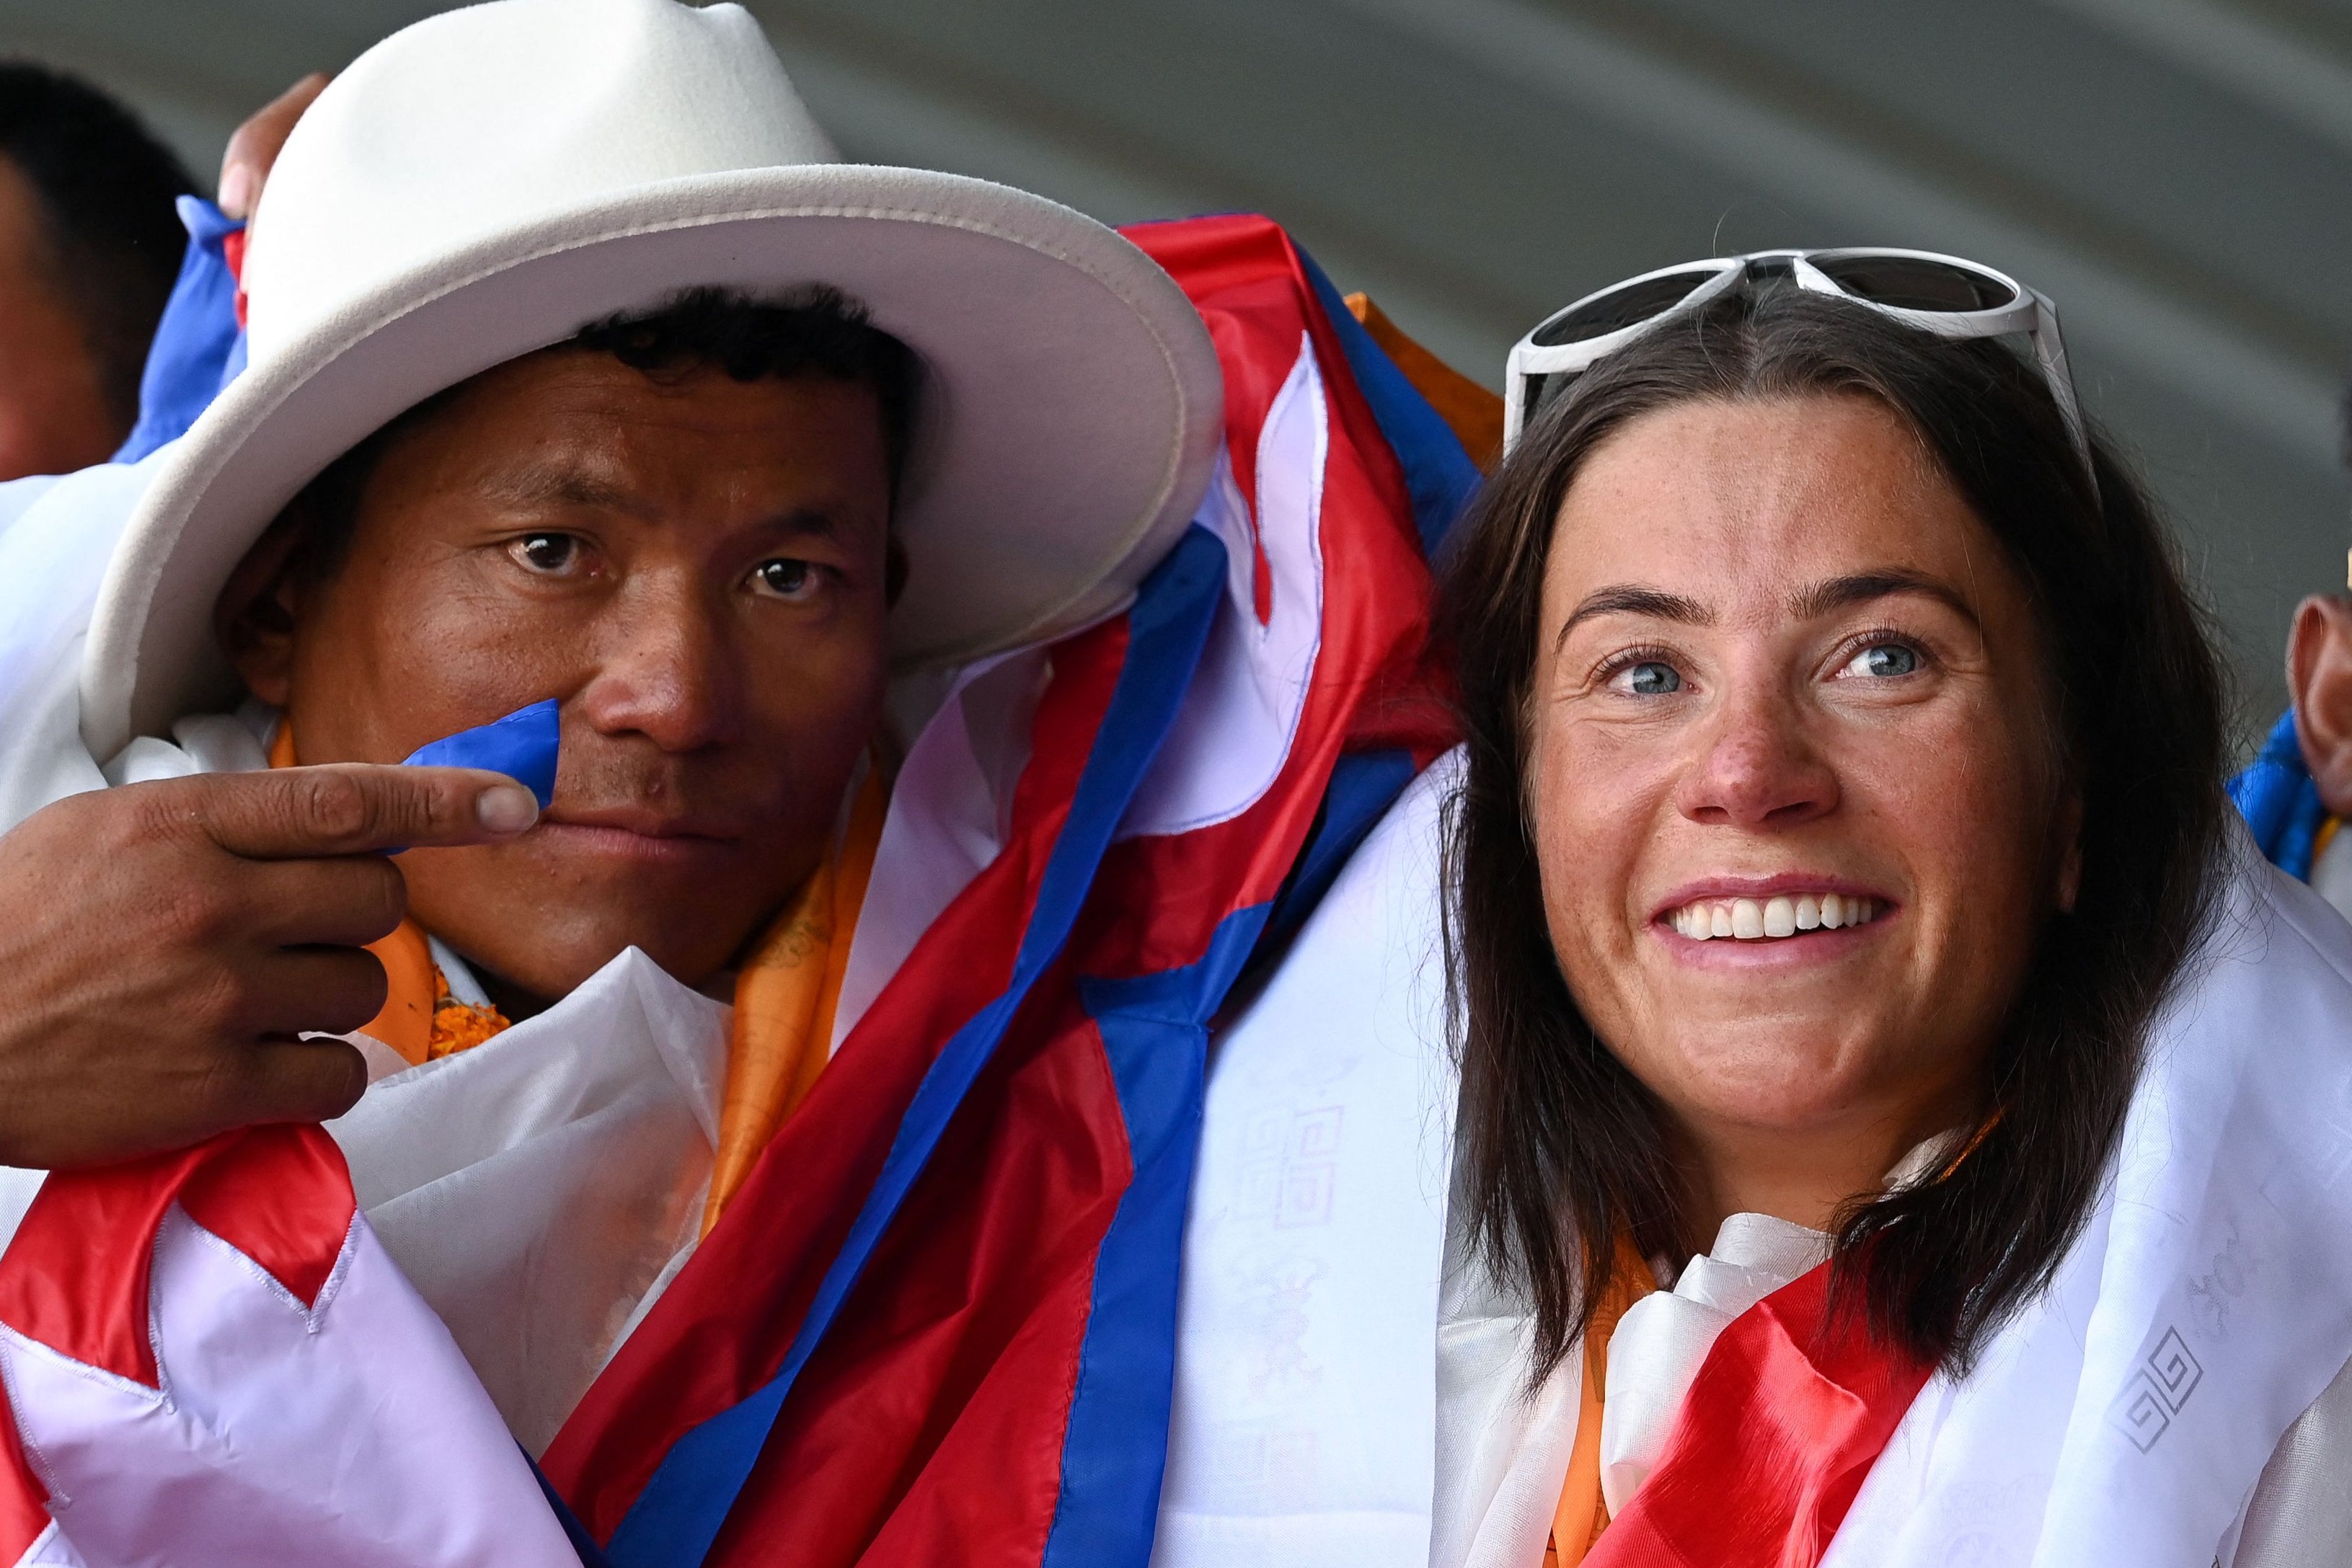 Kristin Harila, right, and Nepali guide Tenjin Sherpa gesture upon their arrival at the Tribhuvan international airport after climbing K2